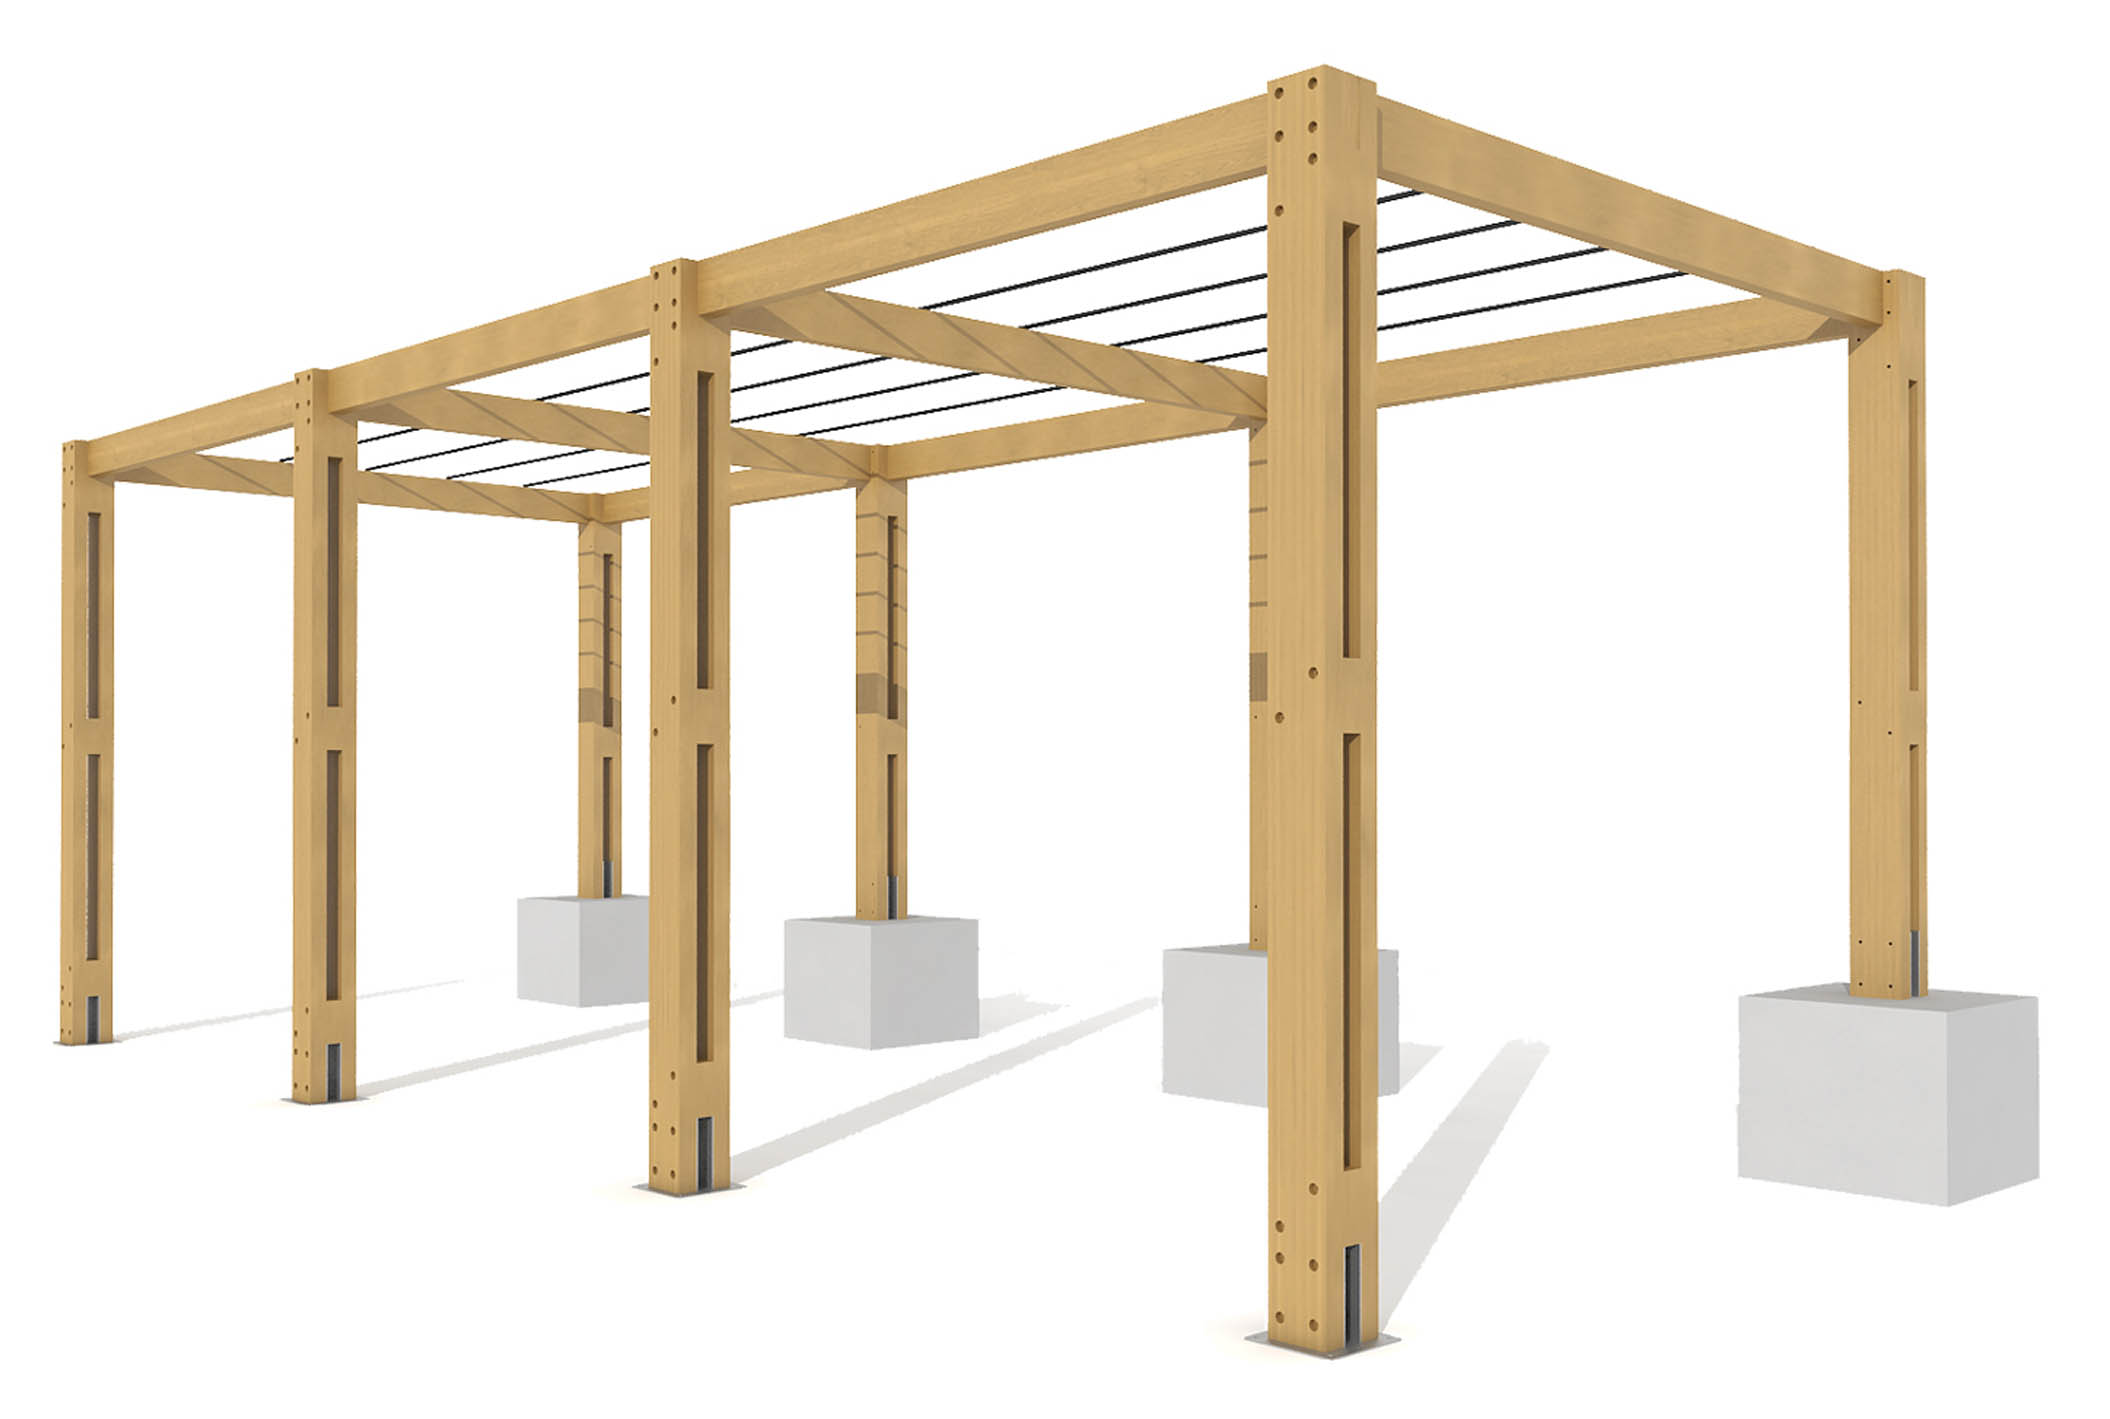 Rendering of pergola of wooden beams and iron bars